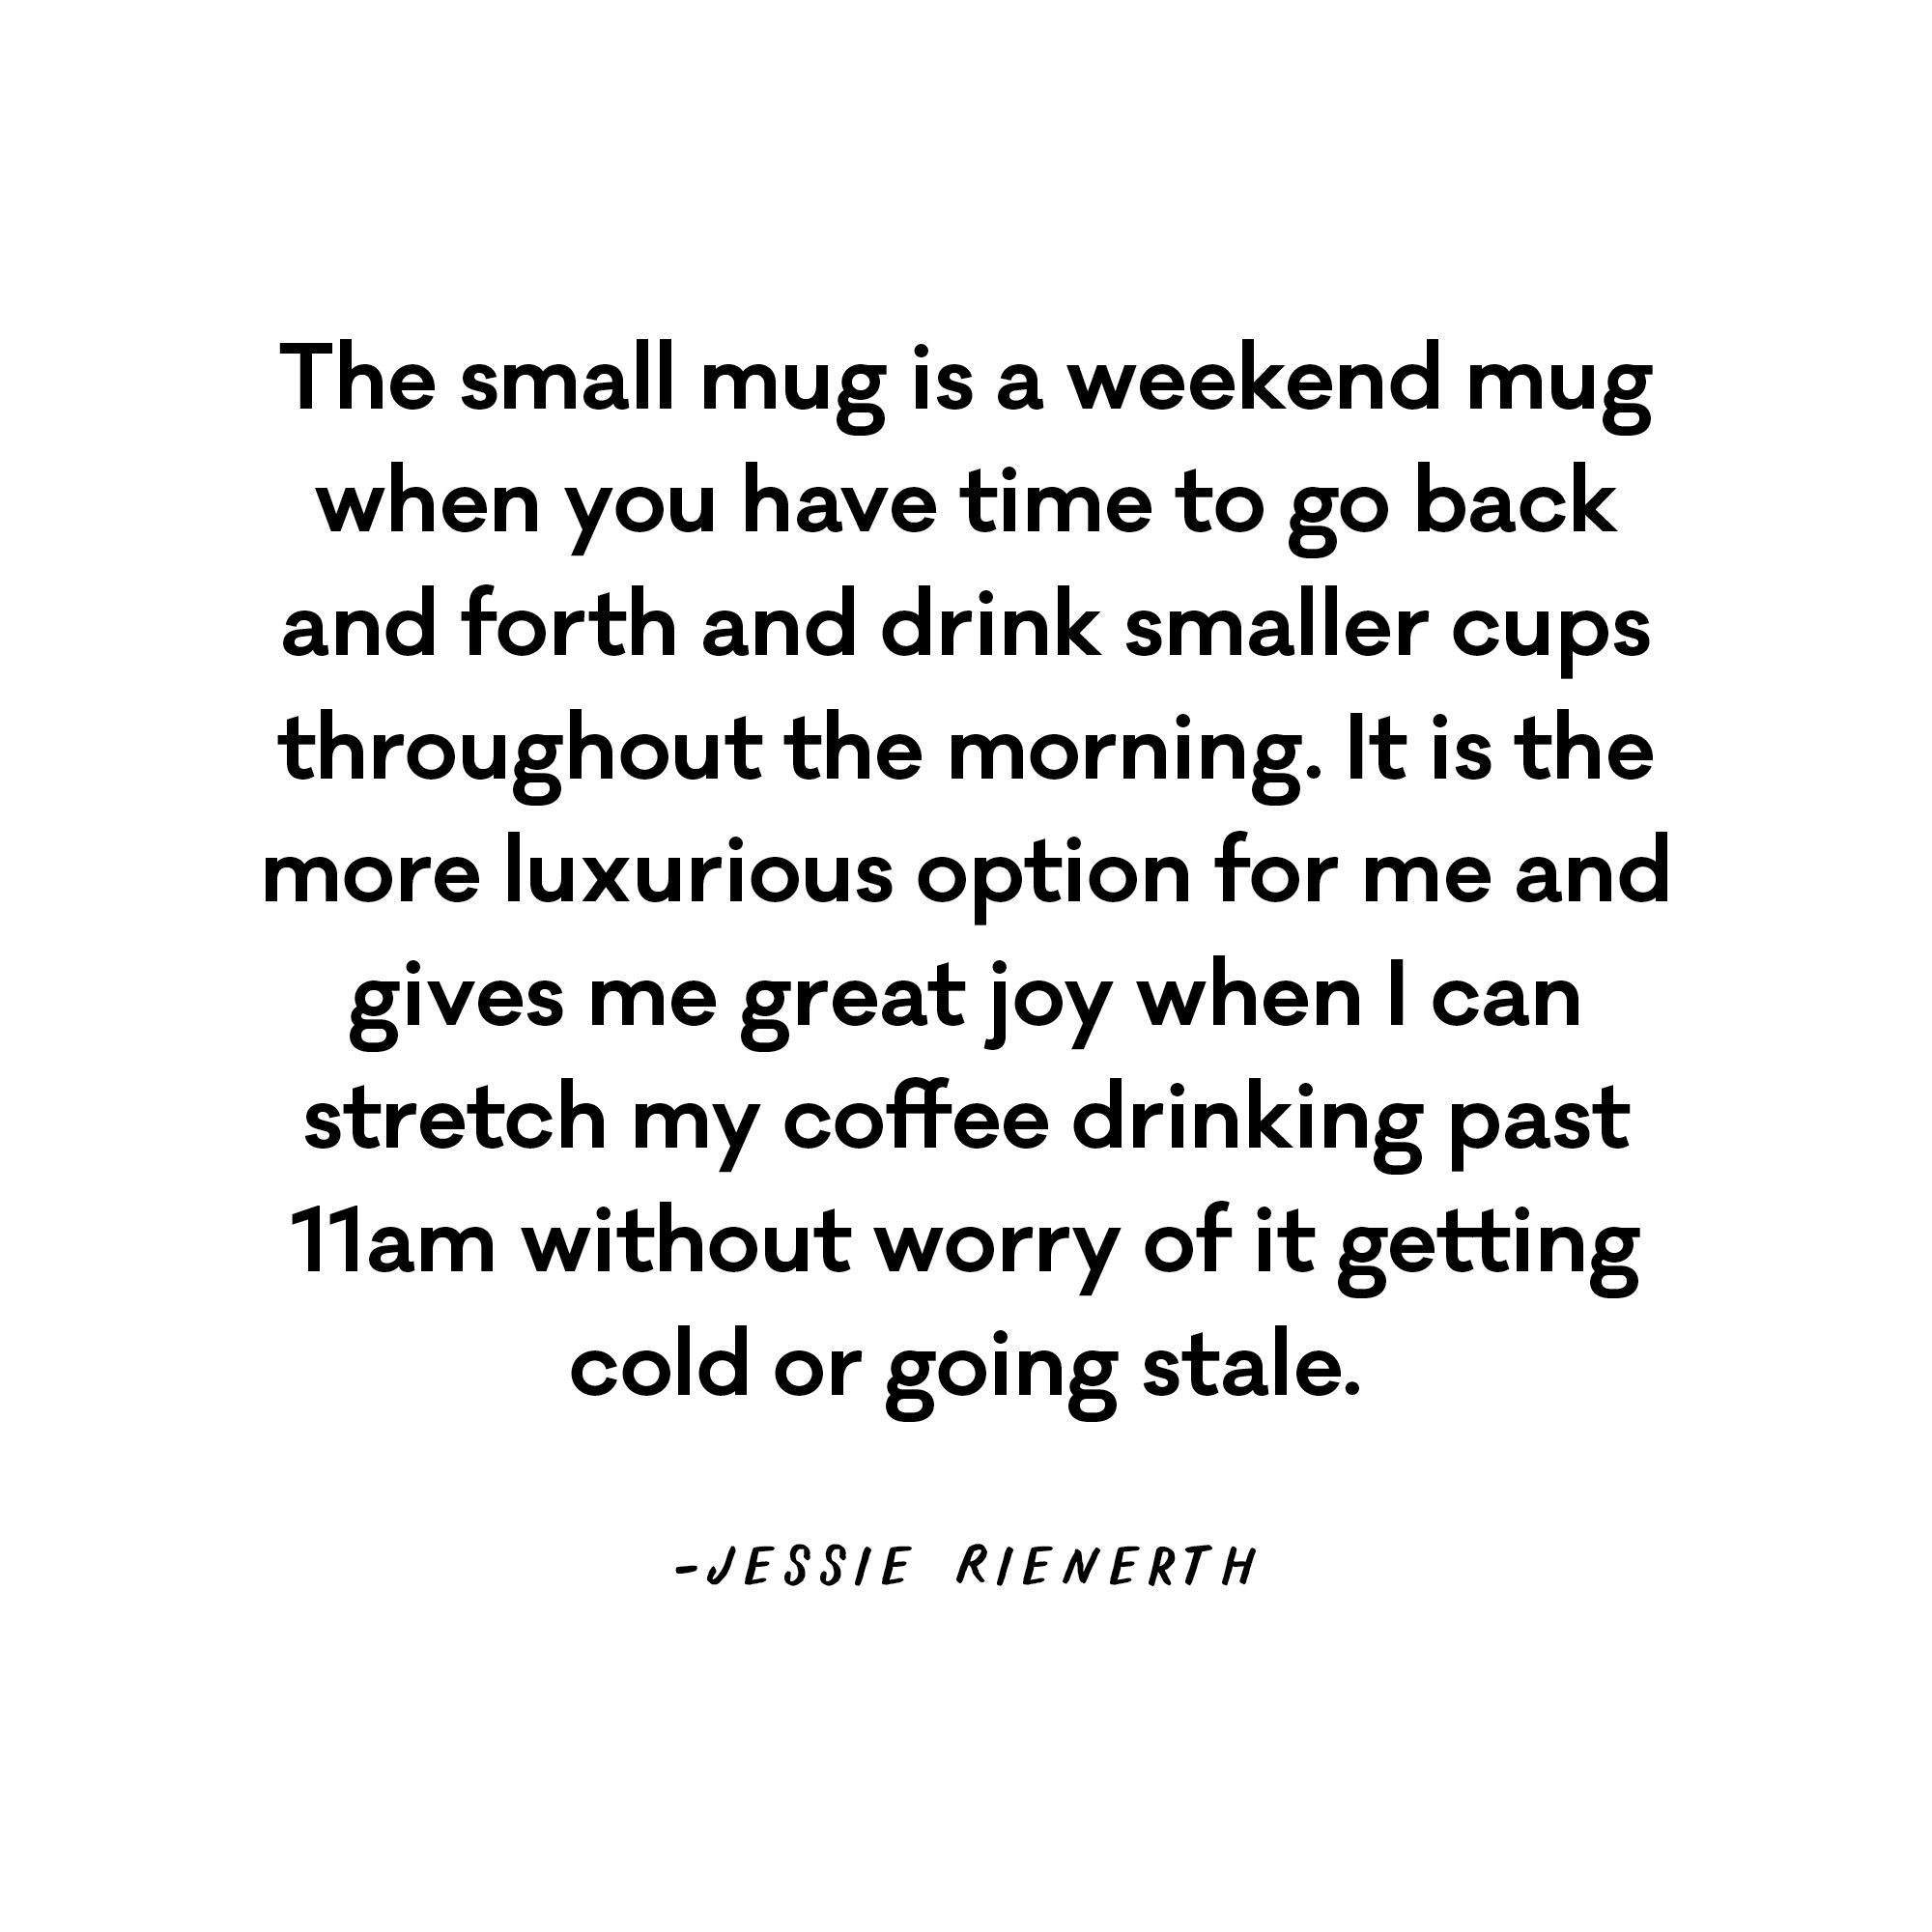 The small mug is a weekend mug when you have time to go back and forth and drink smaller cups throughout the morning. It is the more luxurious option for me and gives me great joy when I can stretch my coffee drinking past 11am without worry of it getting cold or going stale. - Jessie Rienerth